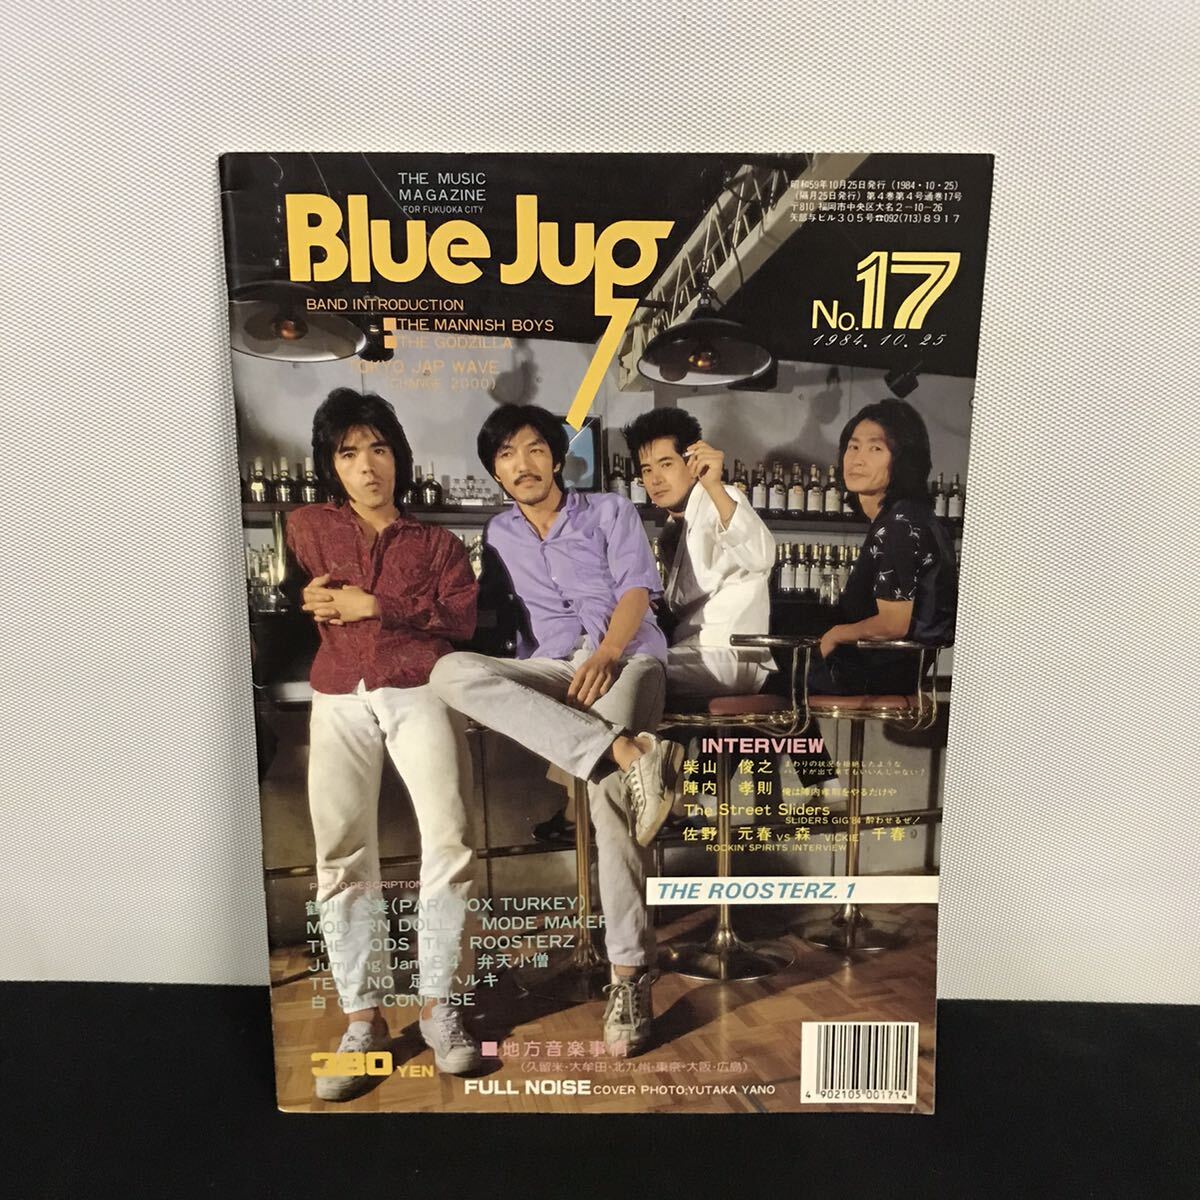 E1887 is # Blue Jug Showa era 59 year 10 month 25 day issue No.17